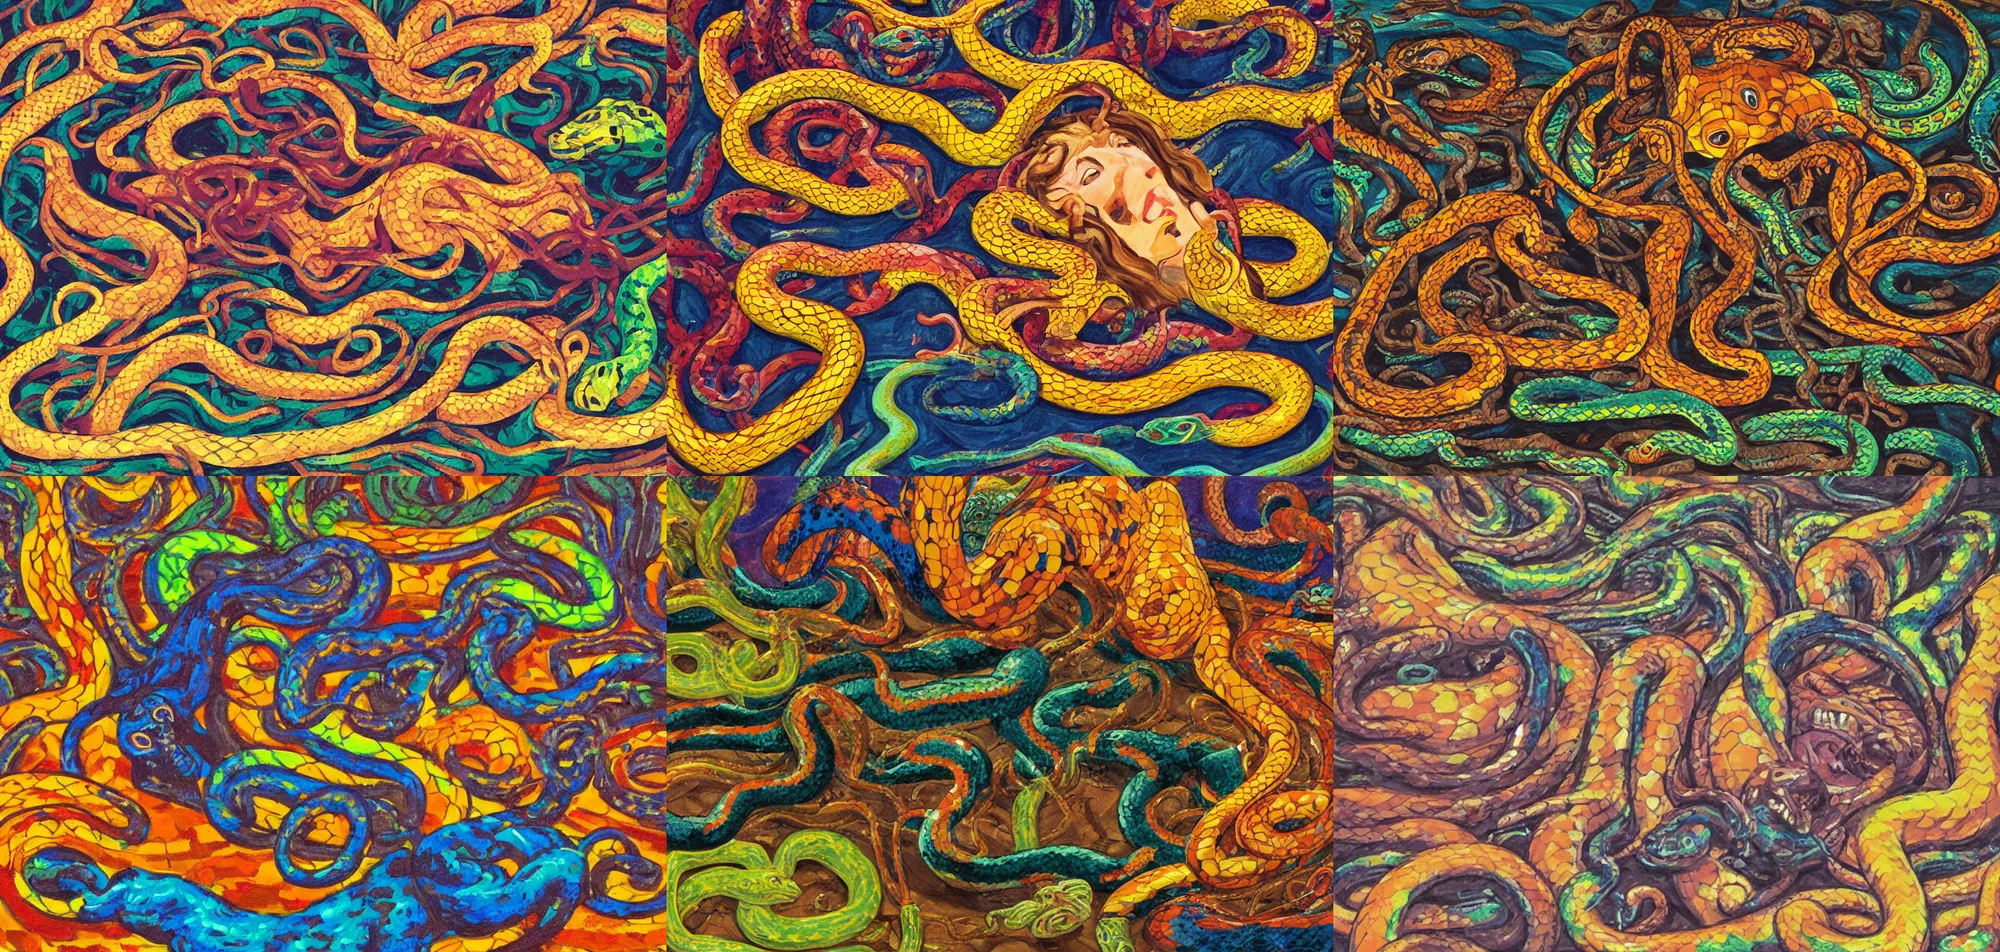 Prompt: Oil painting of the head of Medusa lying on the floor with colorful snakes around